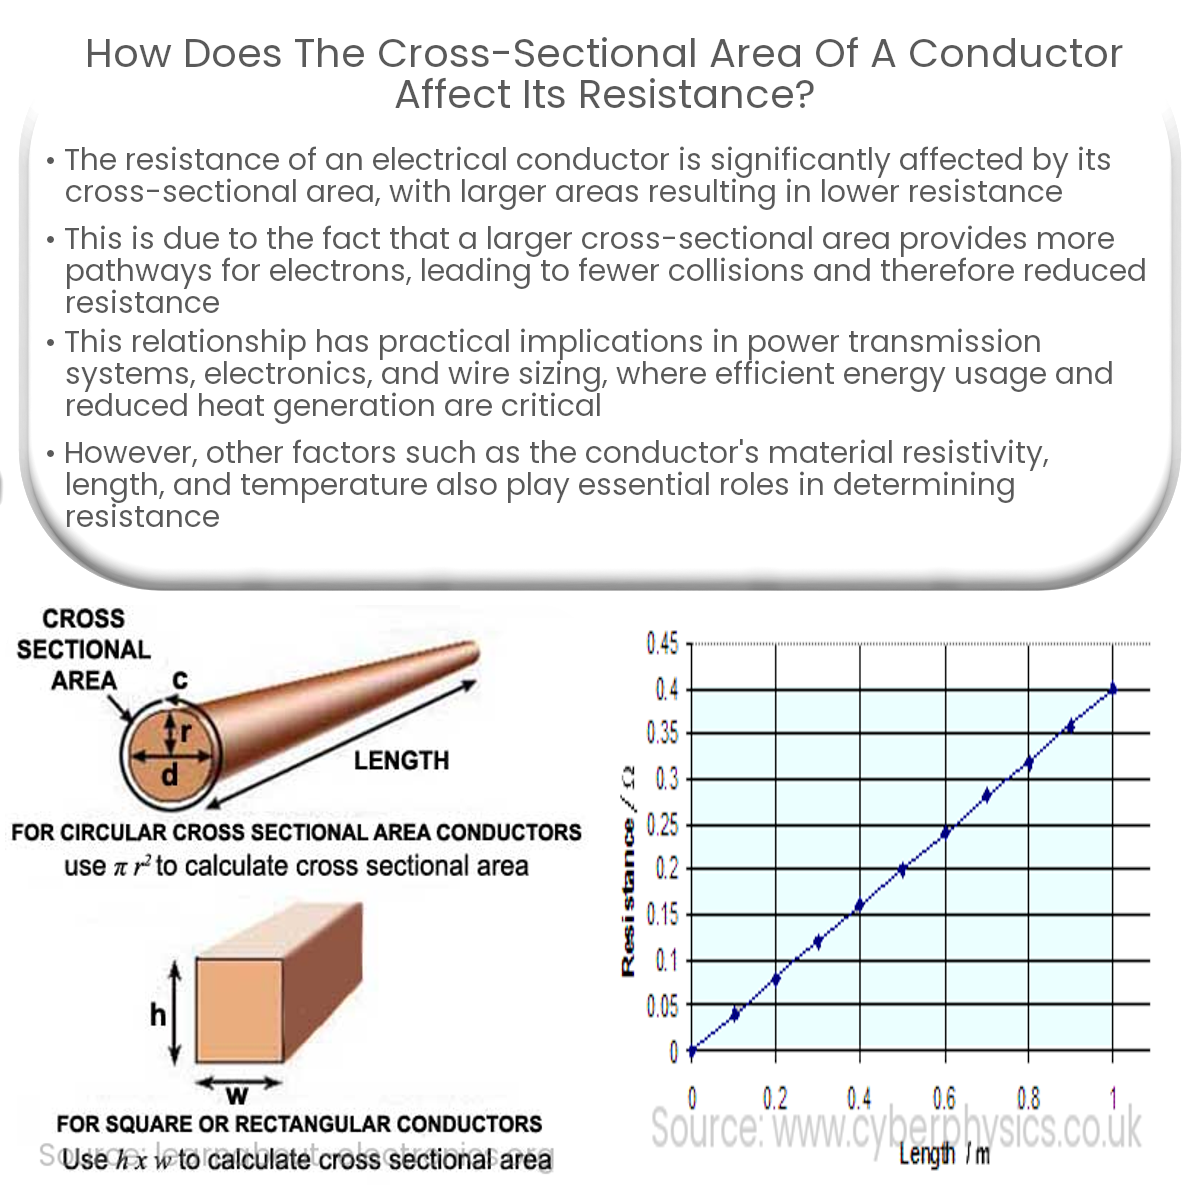 How does the cross-sectional area of a conductor affect its resistance?